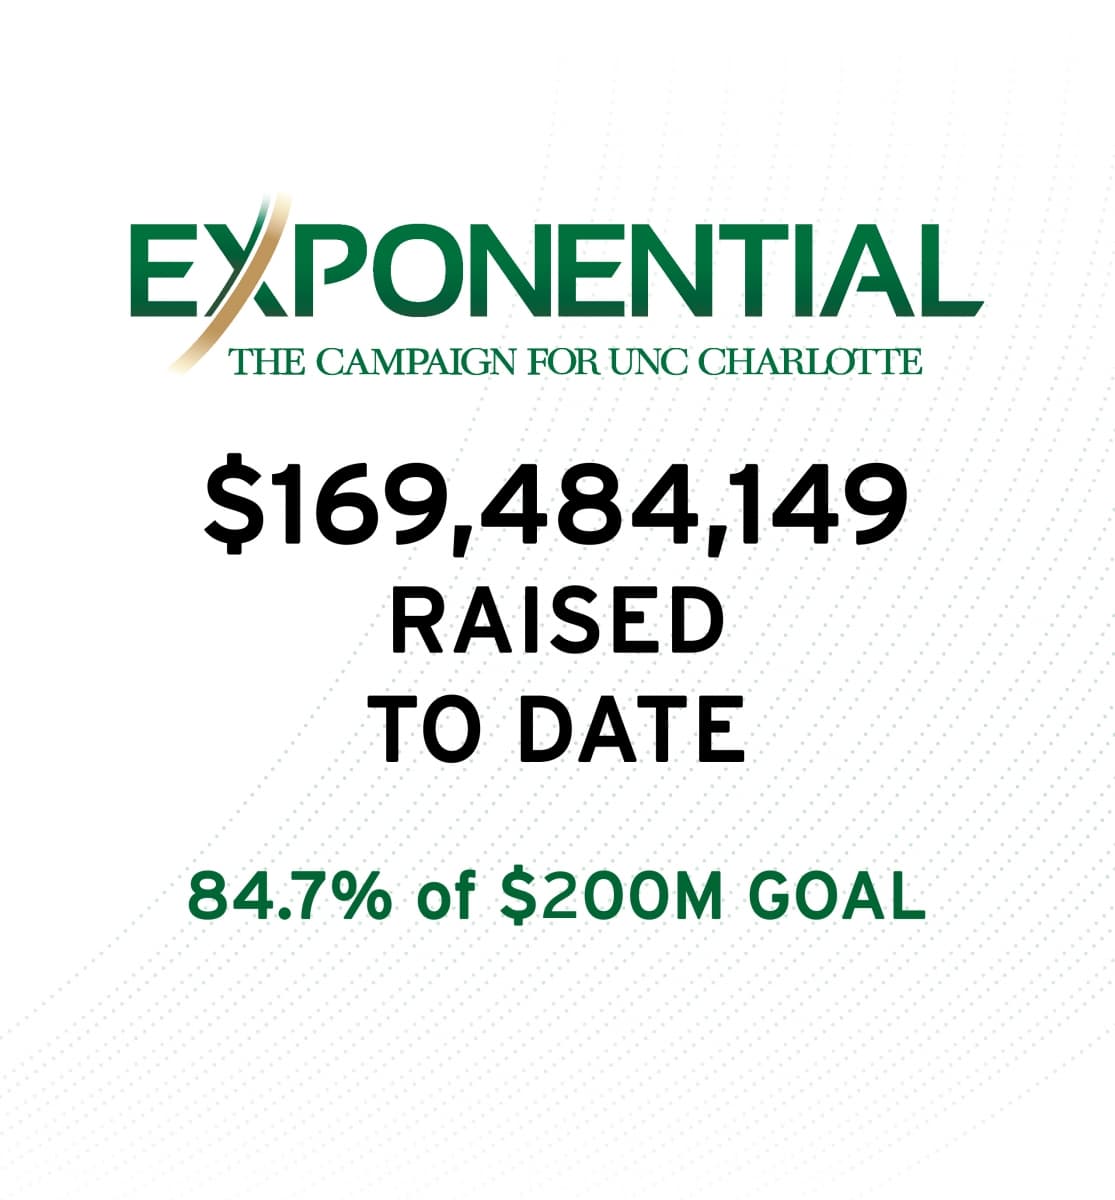 EXPONENTIAL: The Campaign for UNC Charlotte $169,484,149 raised to date; 84.7% of $200M goal